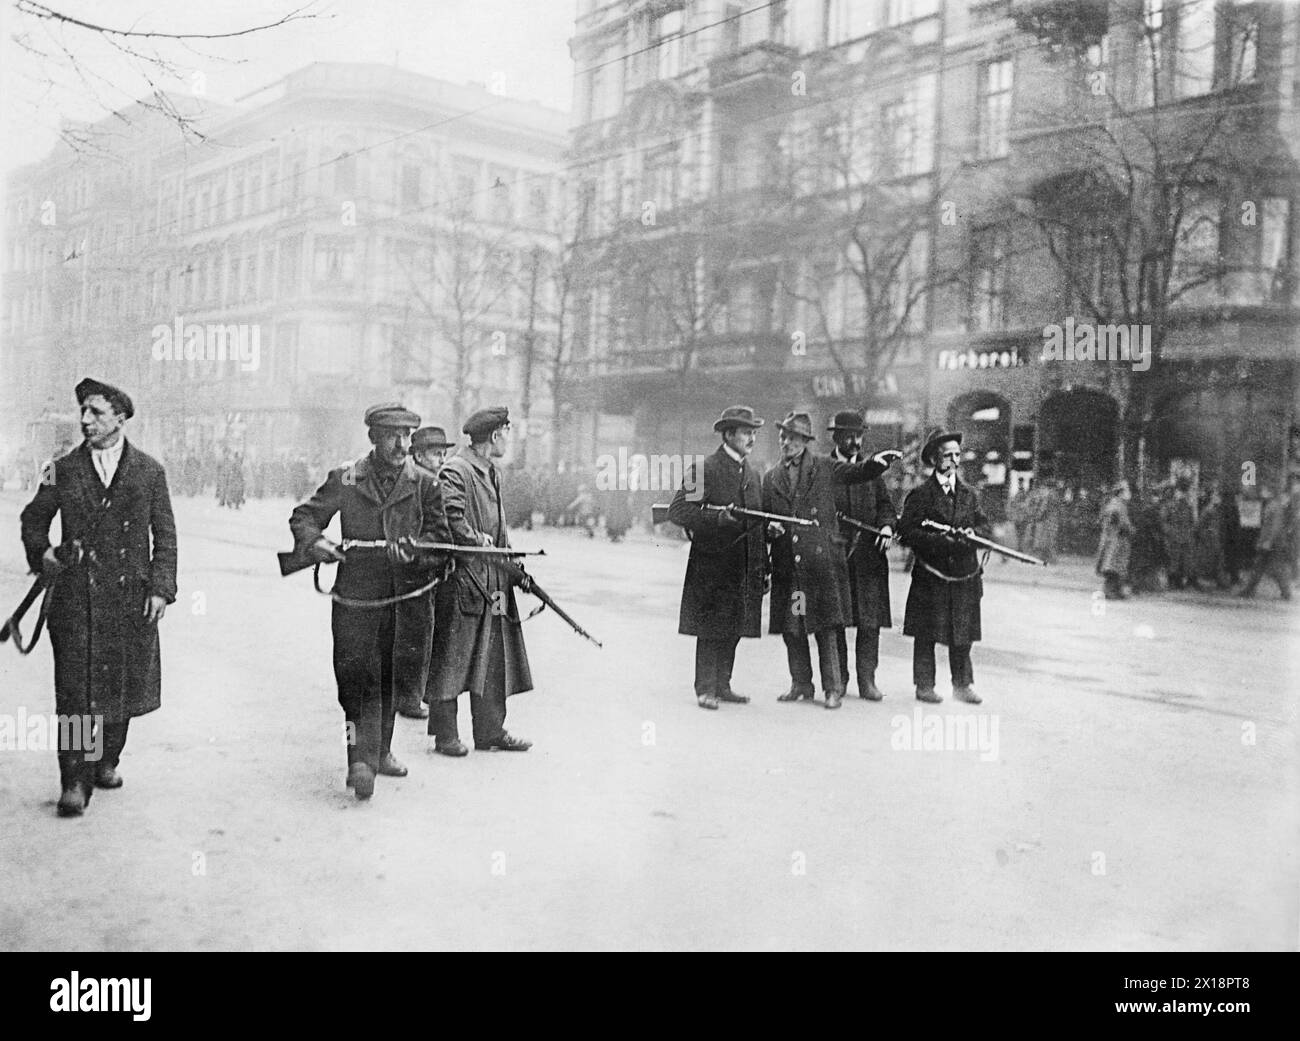 German Revolution - German armed revolutionaries of the Spartacist Movement patrolling streets in Berlin,, Germany after end of world war one ca. 1919 Stock Photo